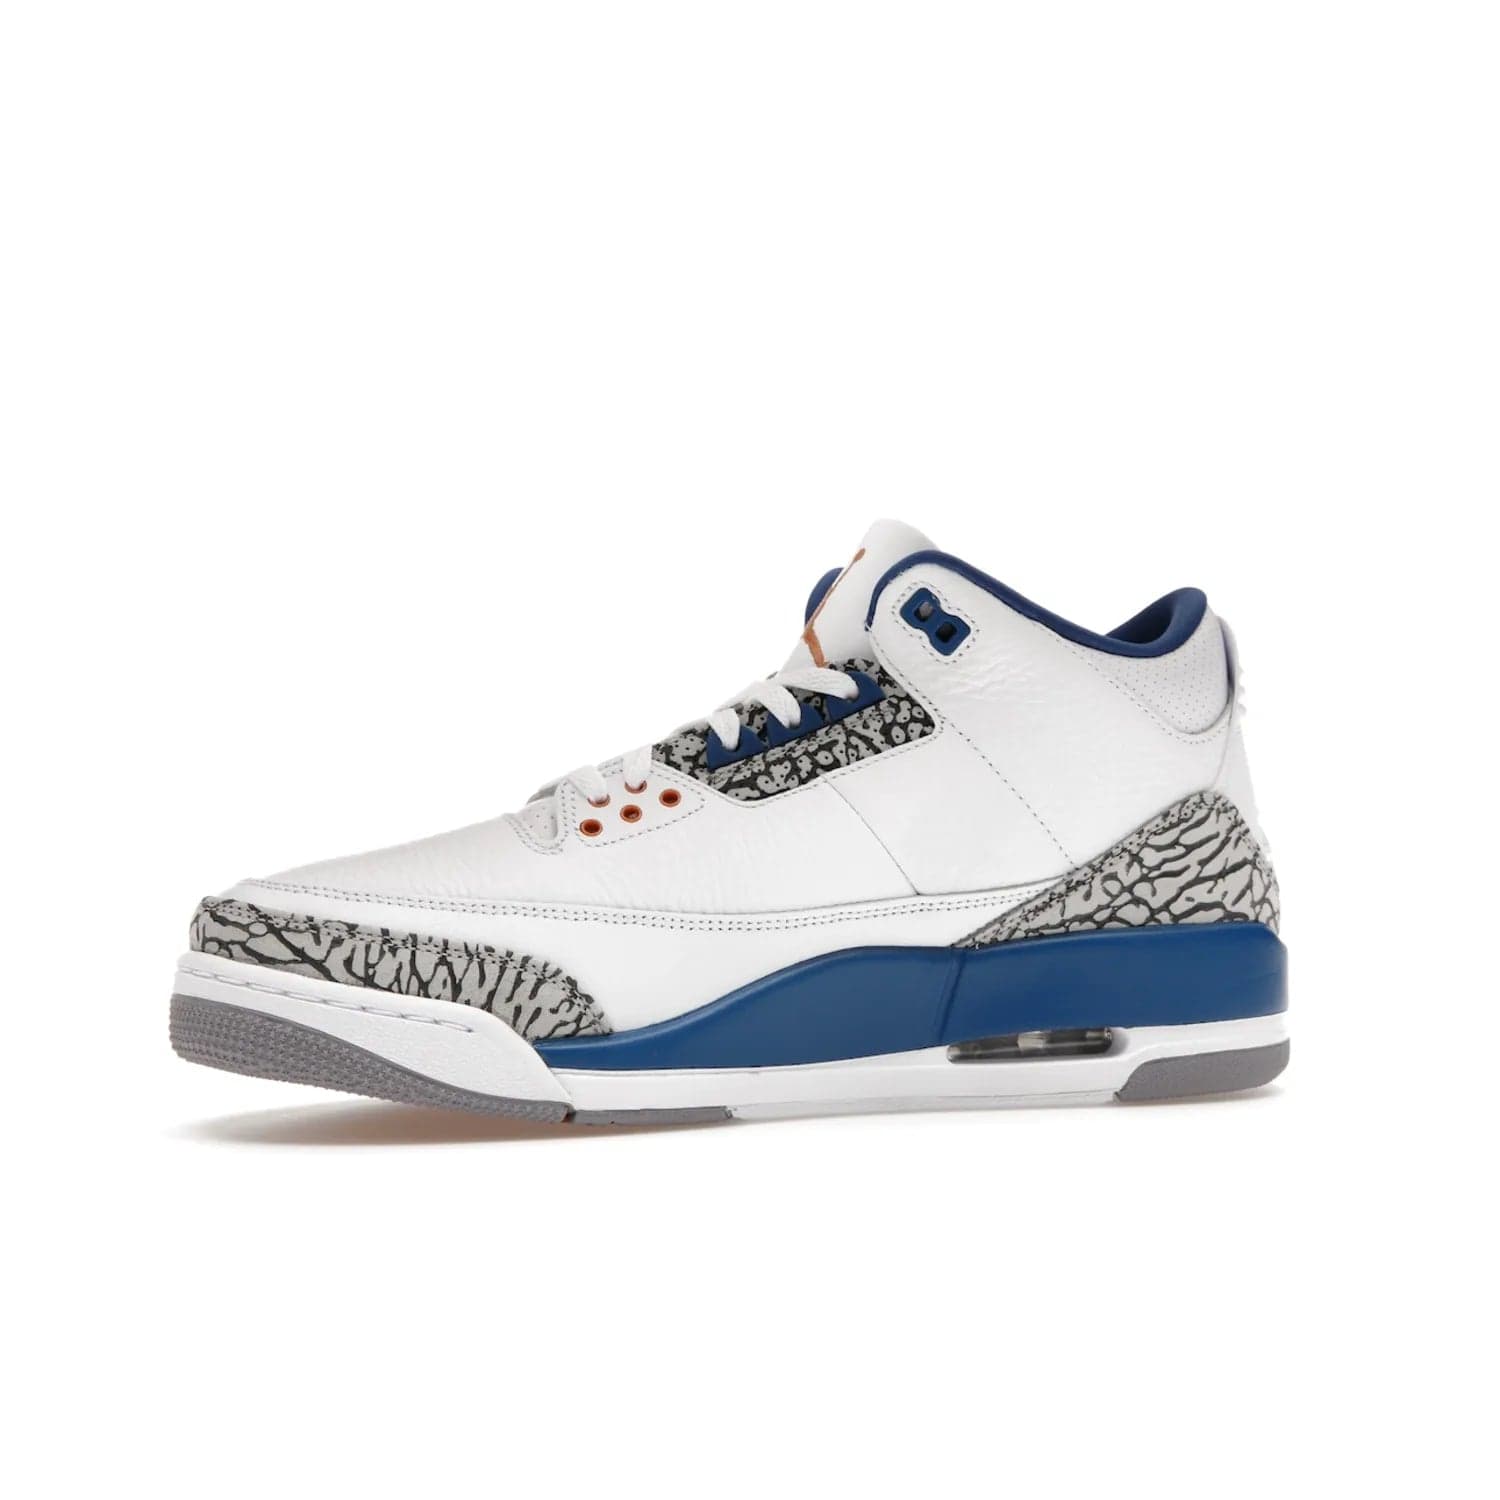 Jordan 3 Retro Wizards - Image 17 - Only at www.BallersClubKickz.com - ##
Special tribute sneaker from Jordan Brand to Michael Jordan's time with the Washington Wizards. Iconic white upper, orange Jumpman logo, blue accents, metallic copper details, and cement grey outsole. Buy the Air Jordan 3 Retro Wizards April 29, 2023.